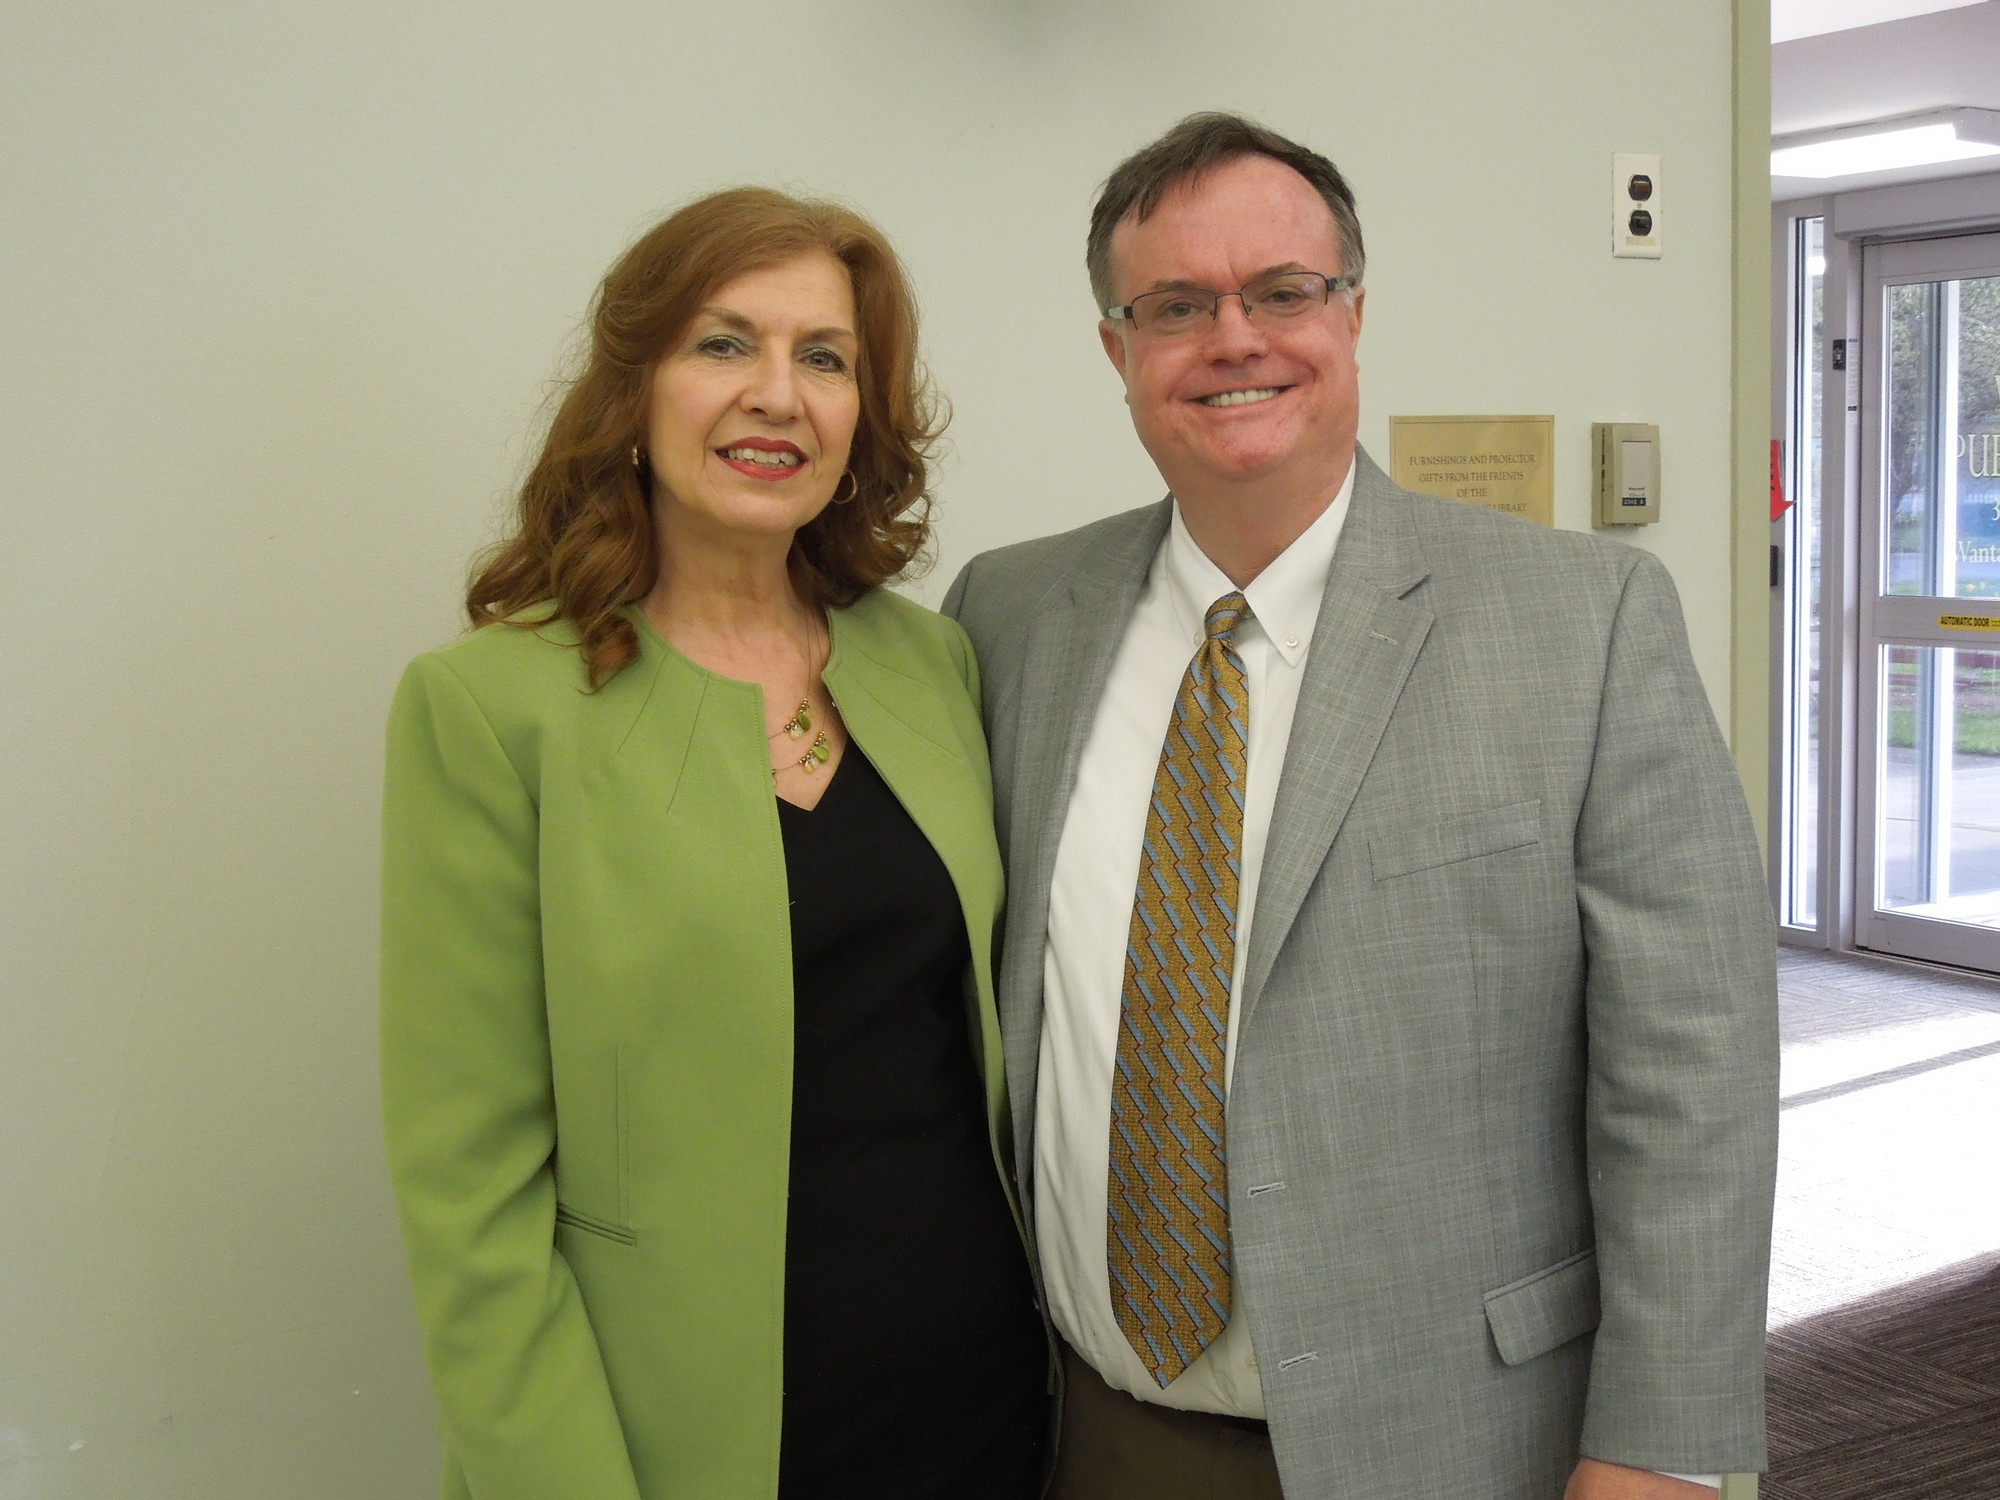 Nassau County Poet Laureate Lorraine LoFrese Conlin and Frank McKenna, a board director of the Nassau County Poet Laureate Society and Seaford Library director, at a poetry reading at the Wantagh Memorial Library.